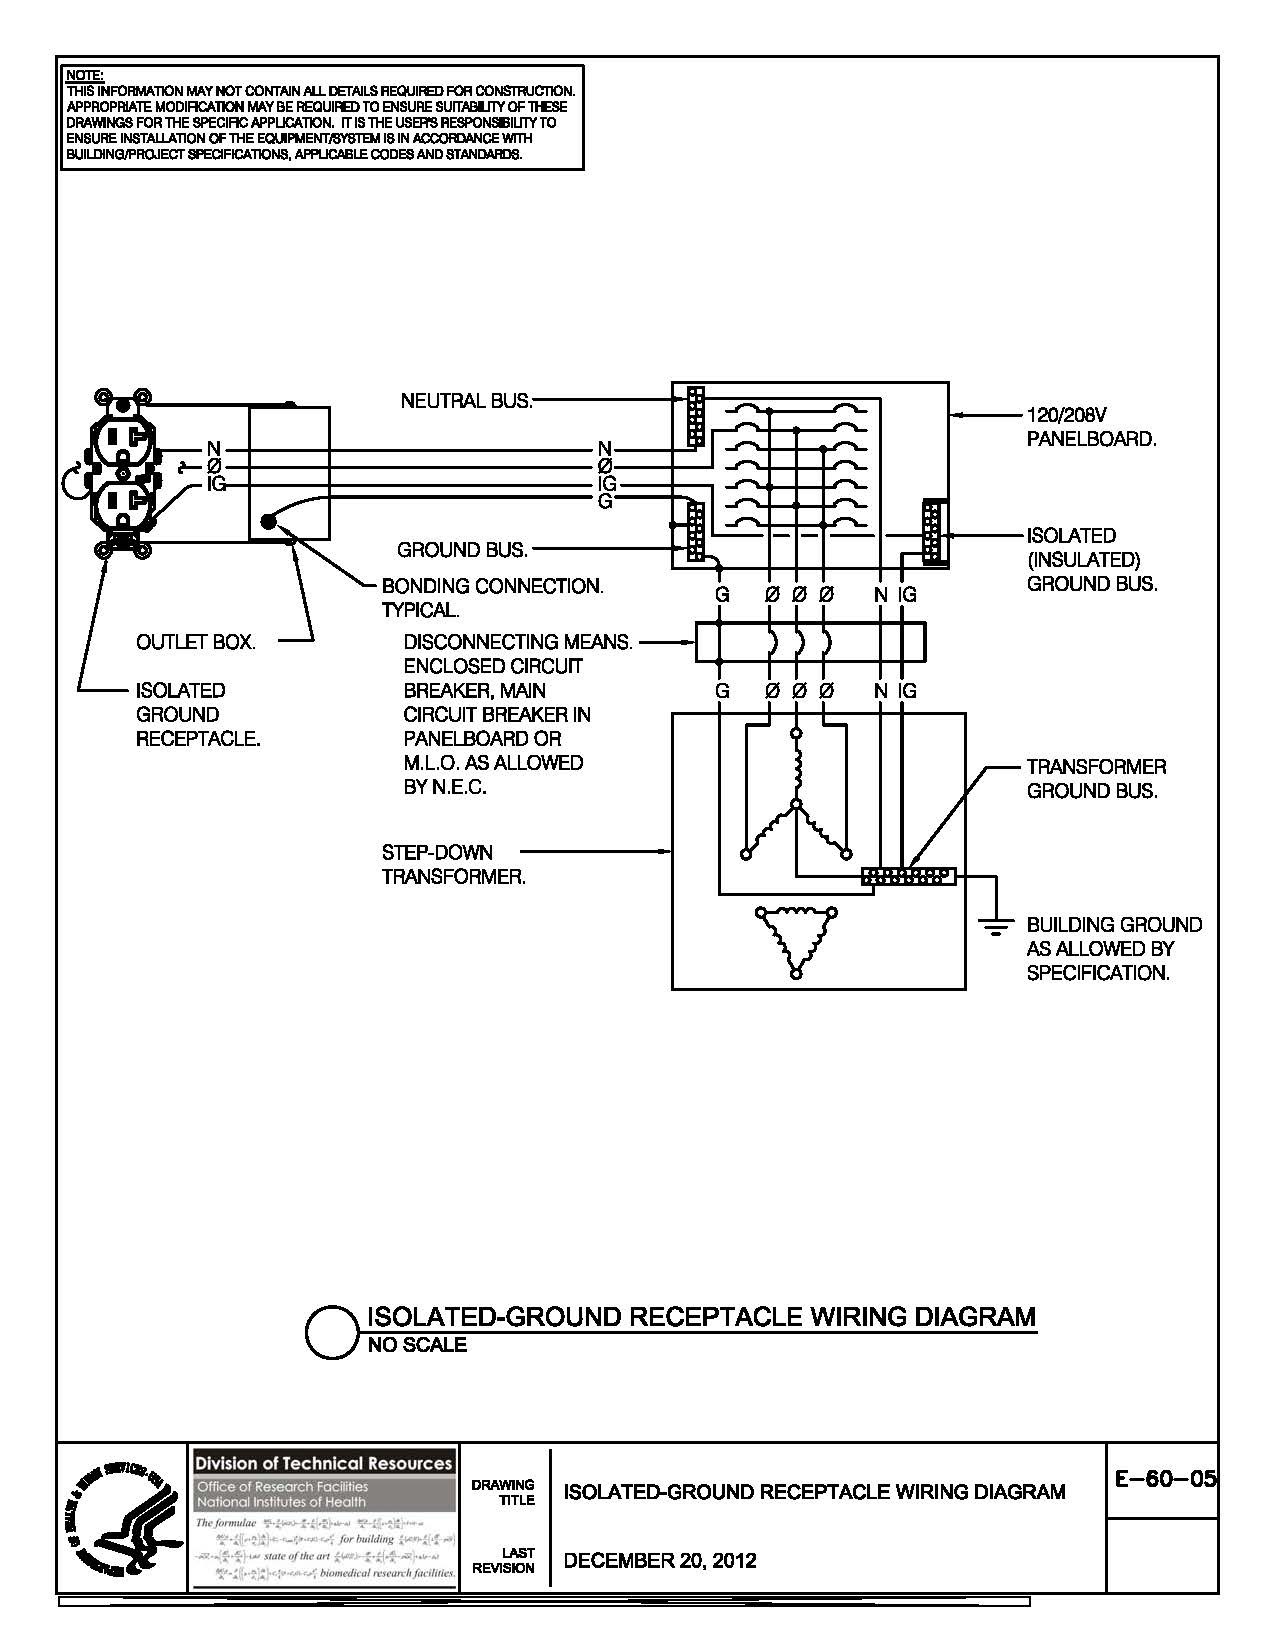 E 60 05 Isolated Ground Receptacle Wiring Diagram